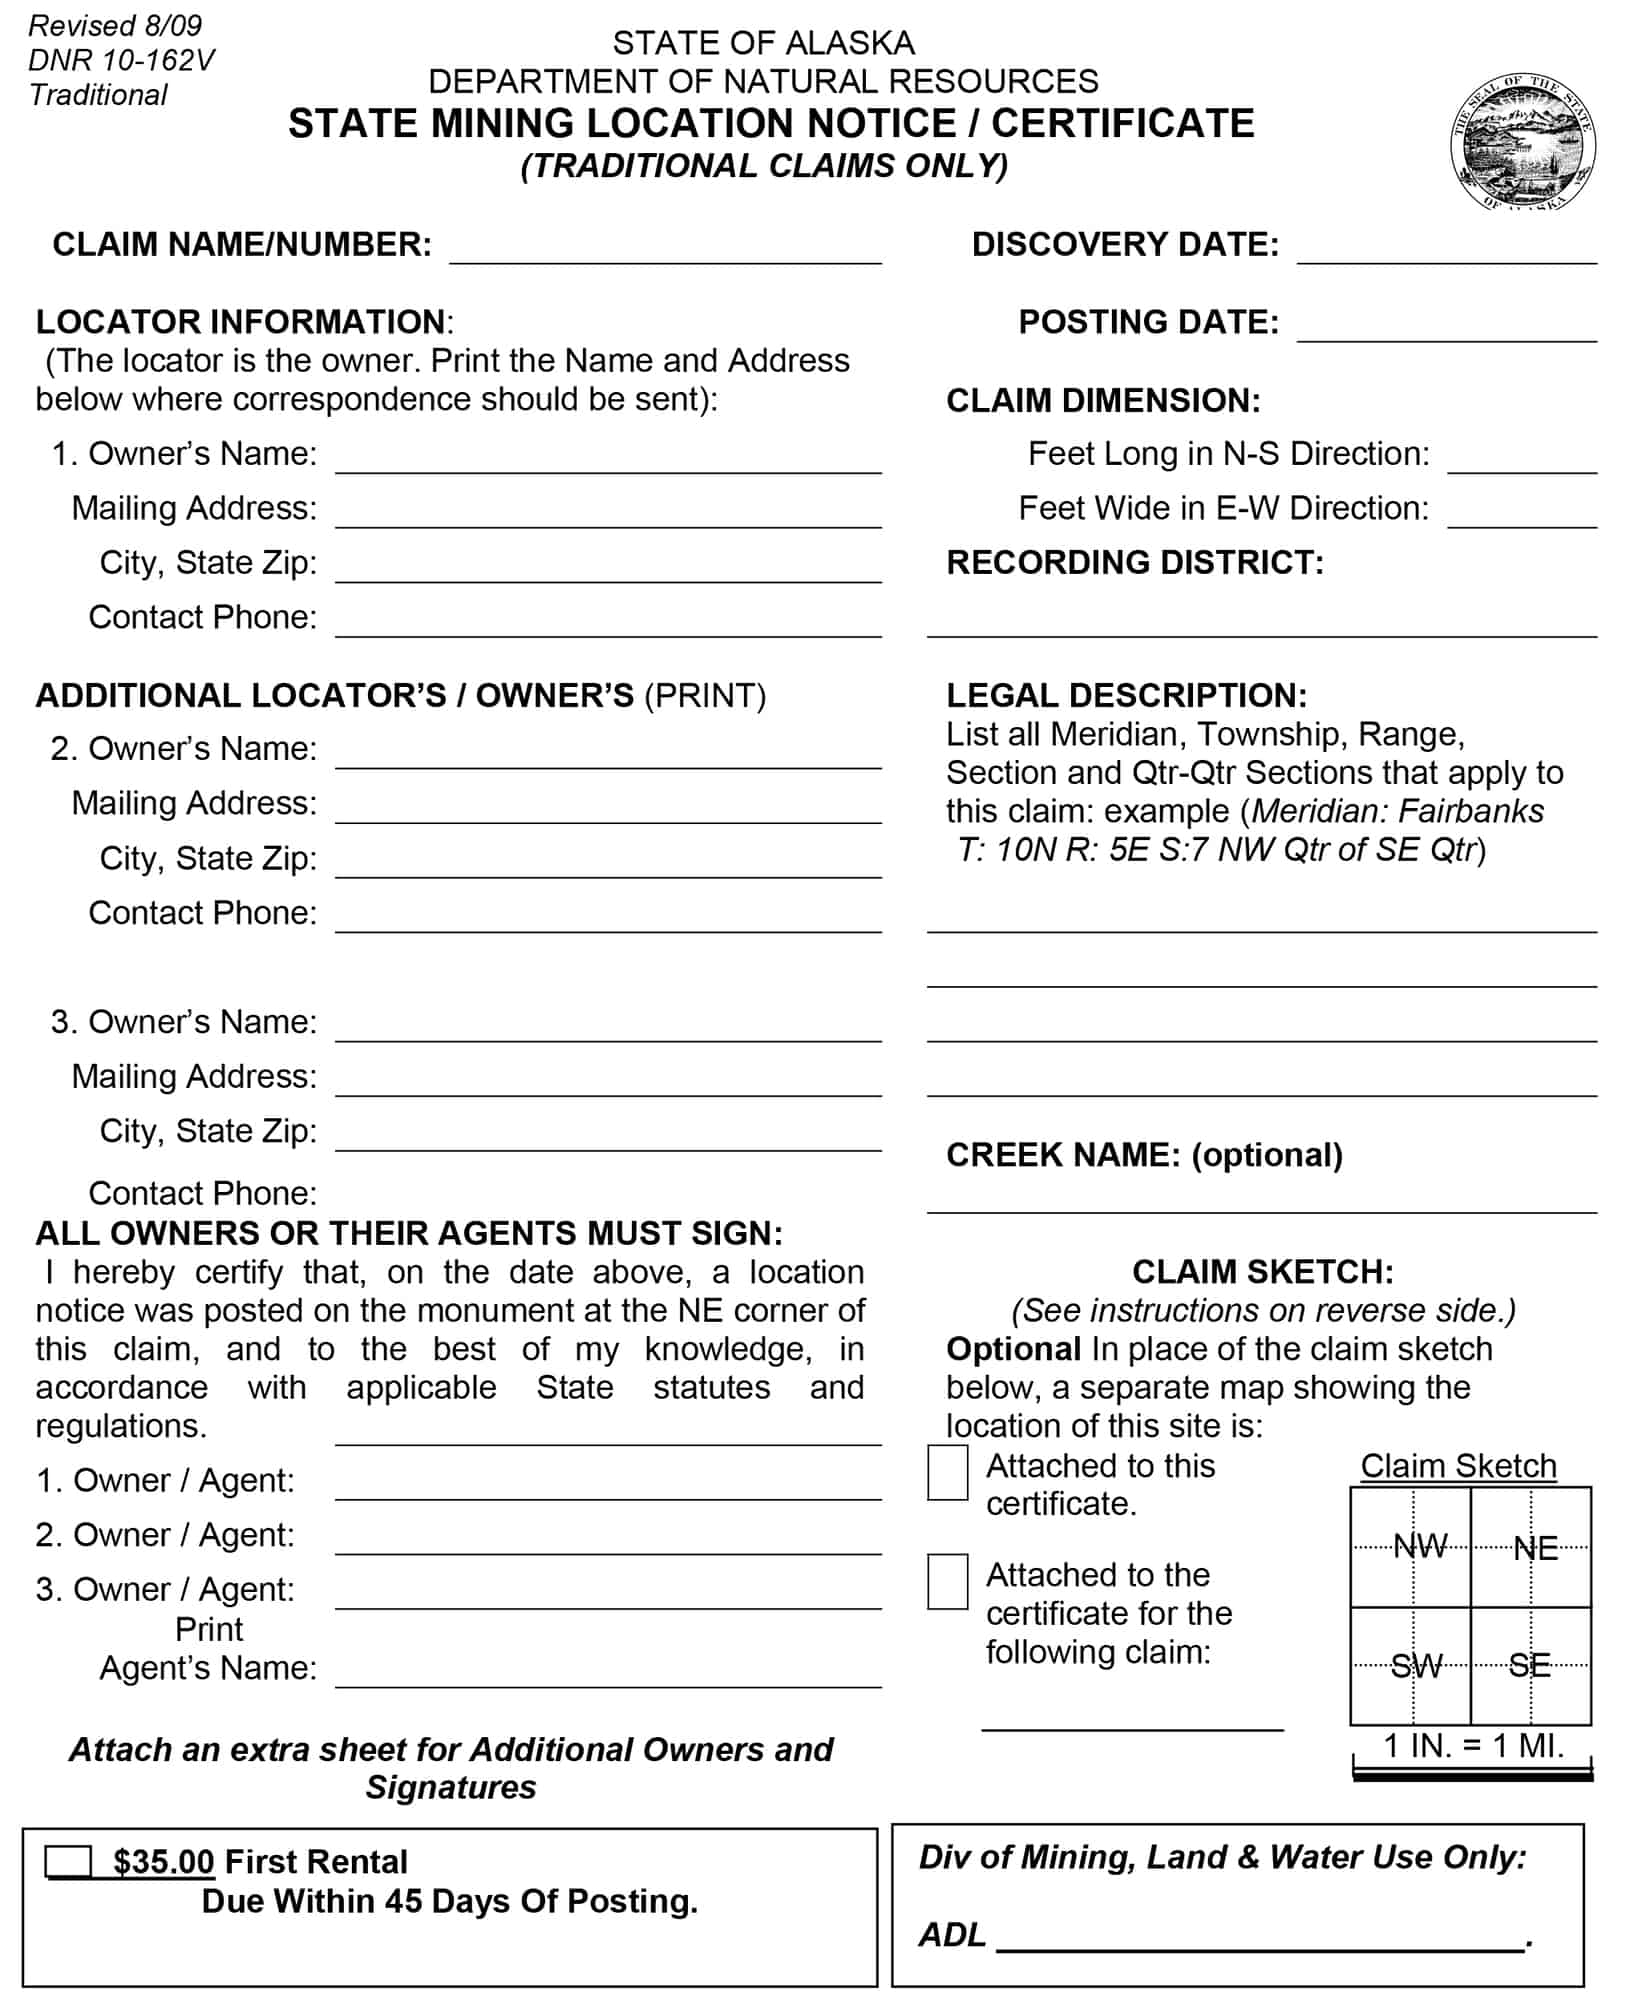 When staking claims in Alaska, use this form. 